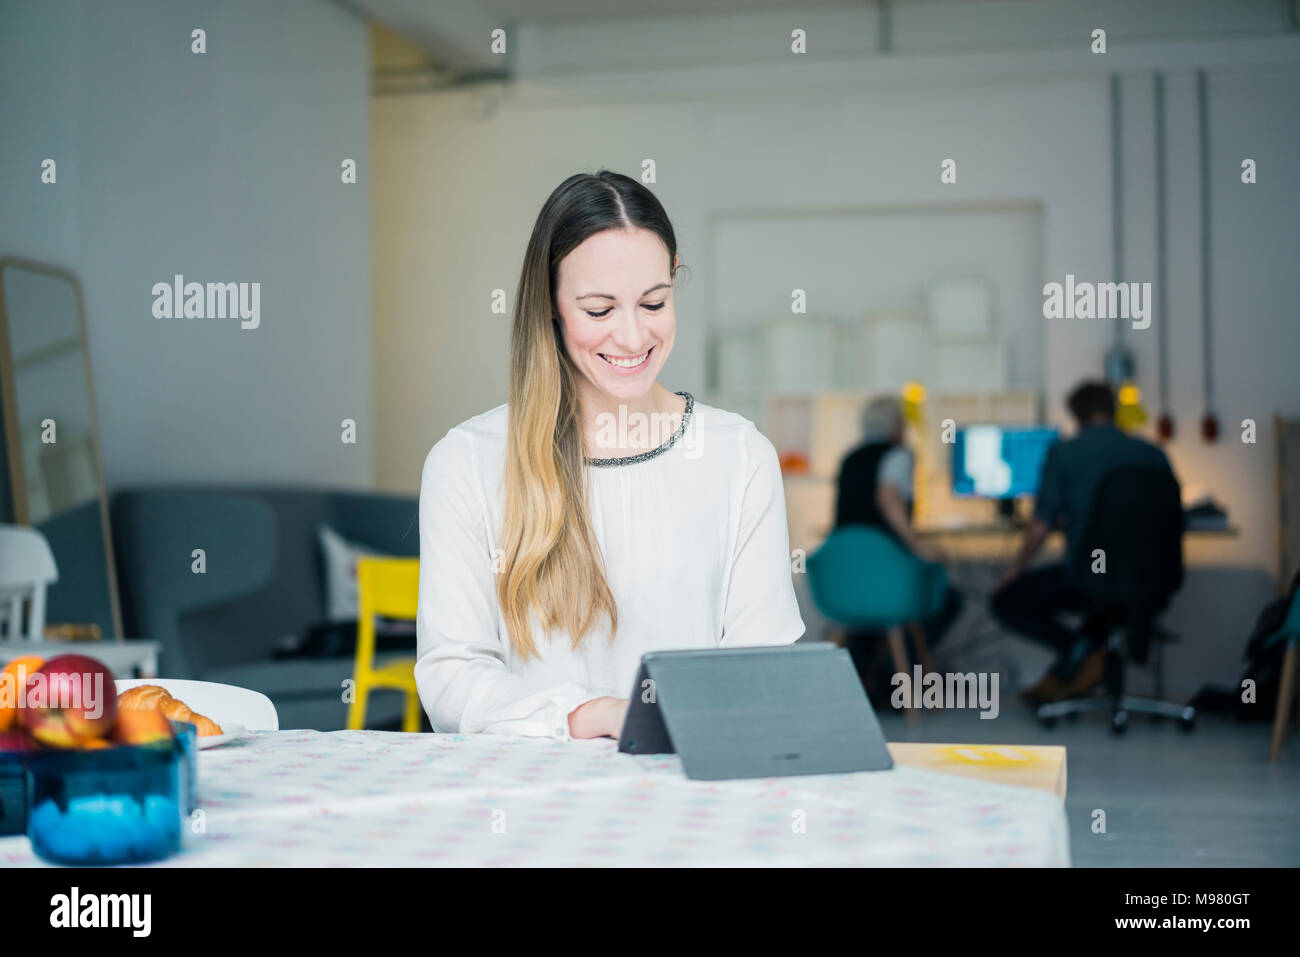 Portrait of smiling young businesswoman working on tablet in a loft Stock Photo